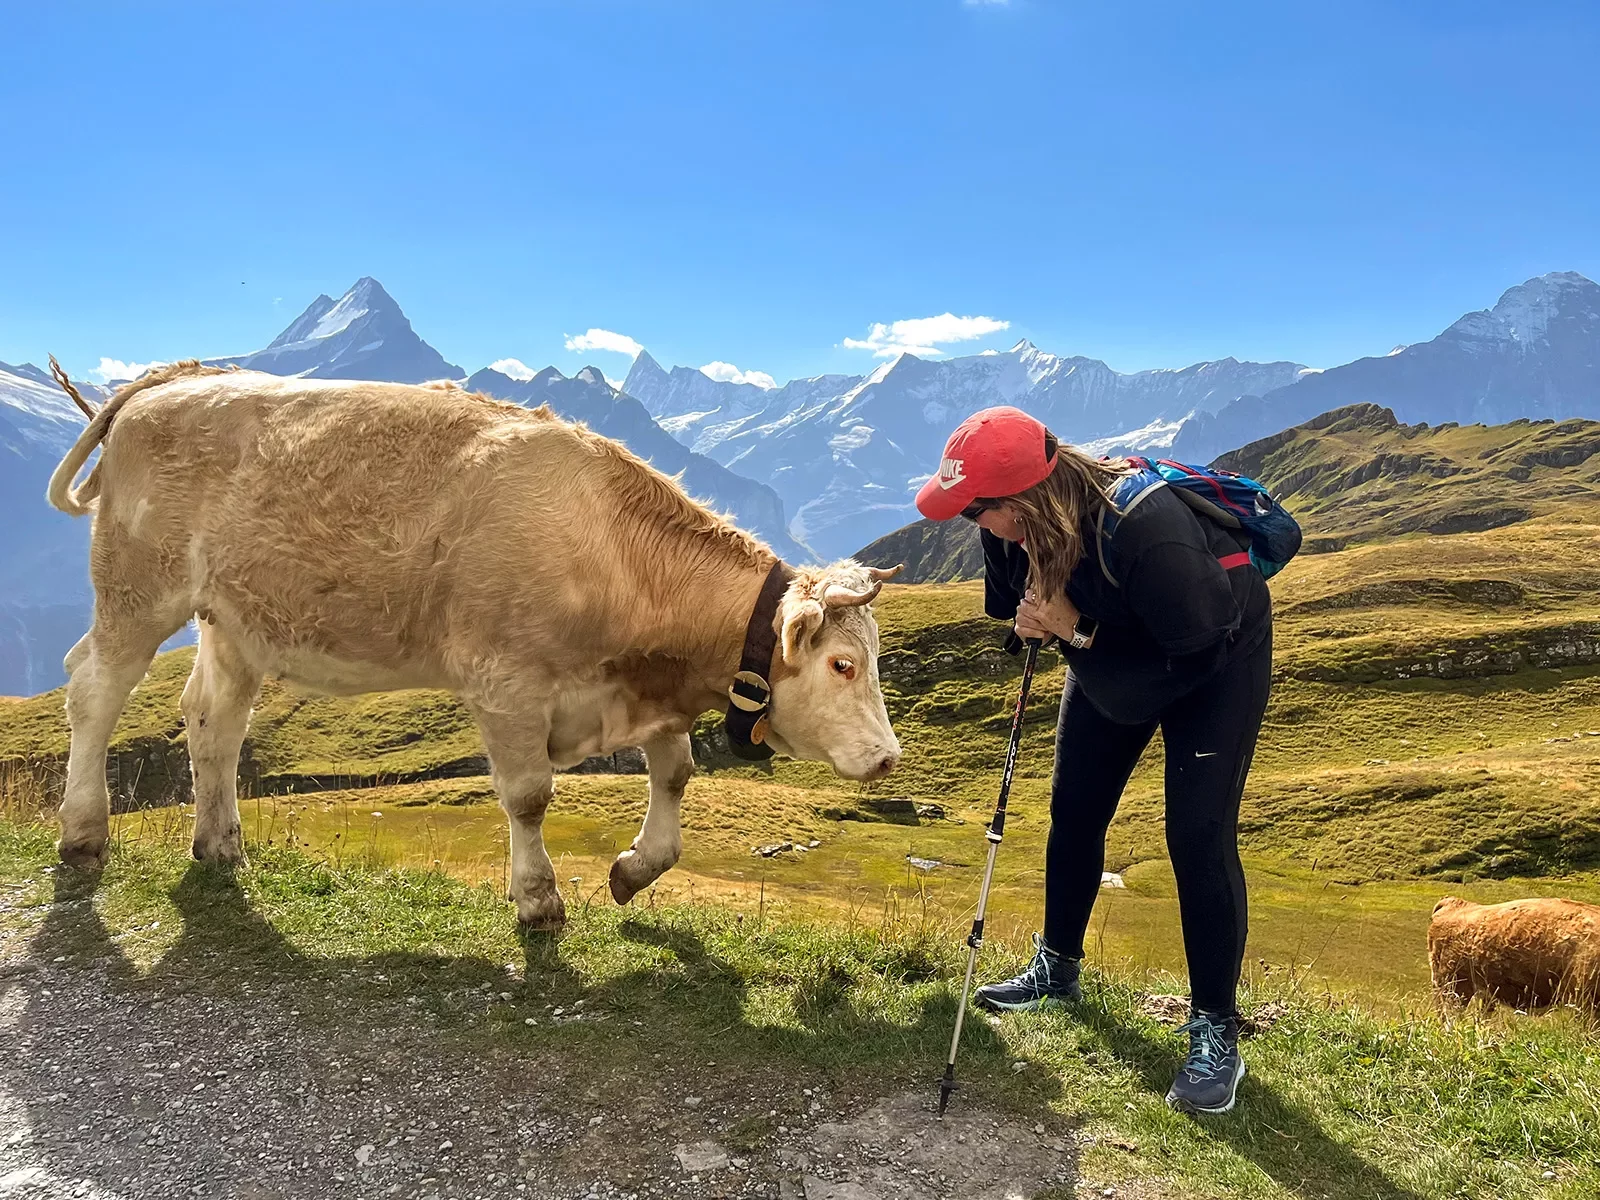 Guest talking to cow, mountain in background.